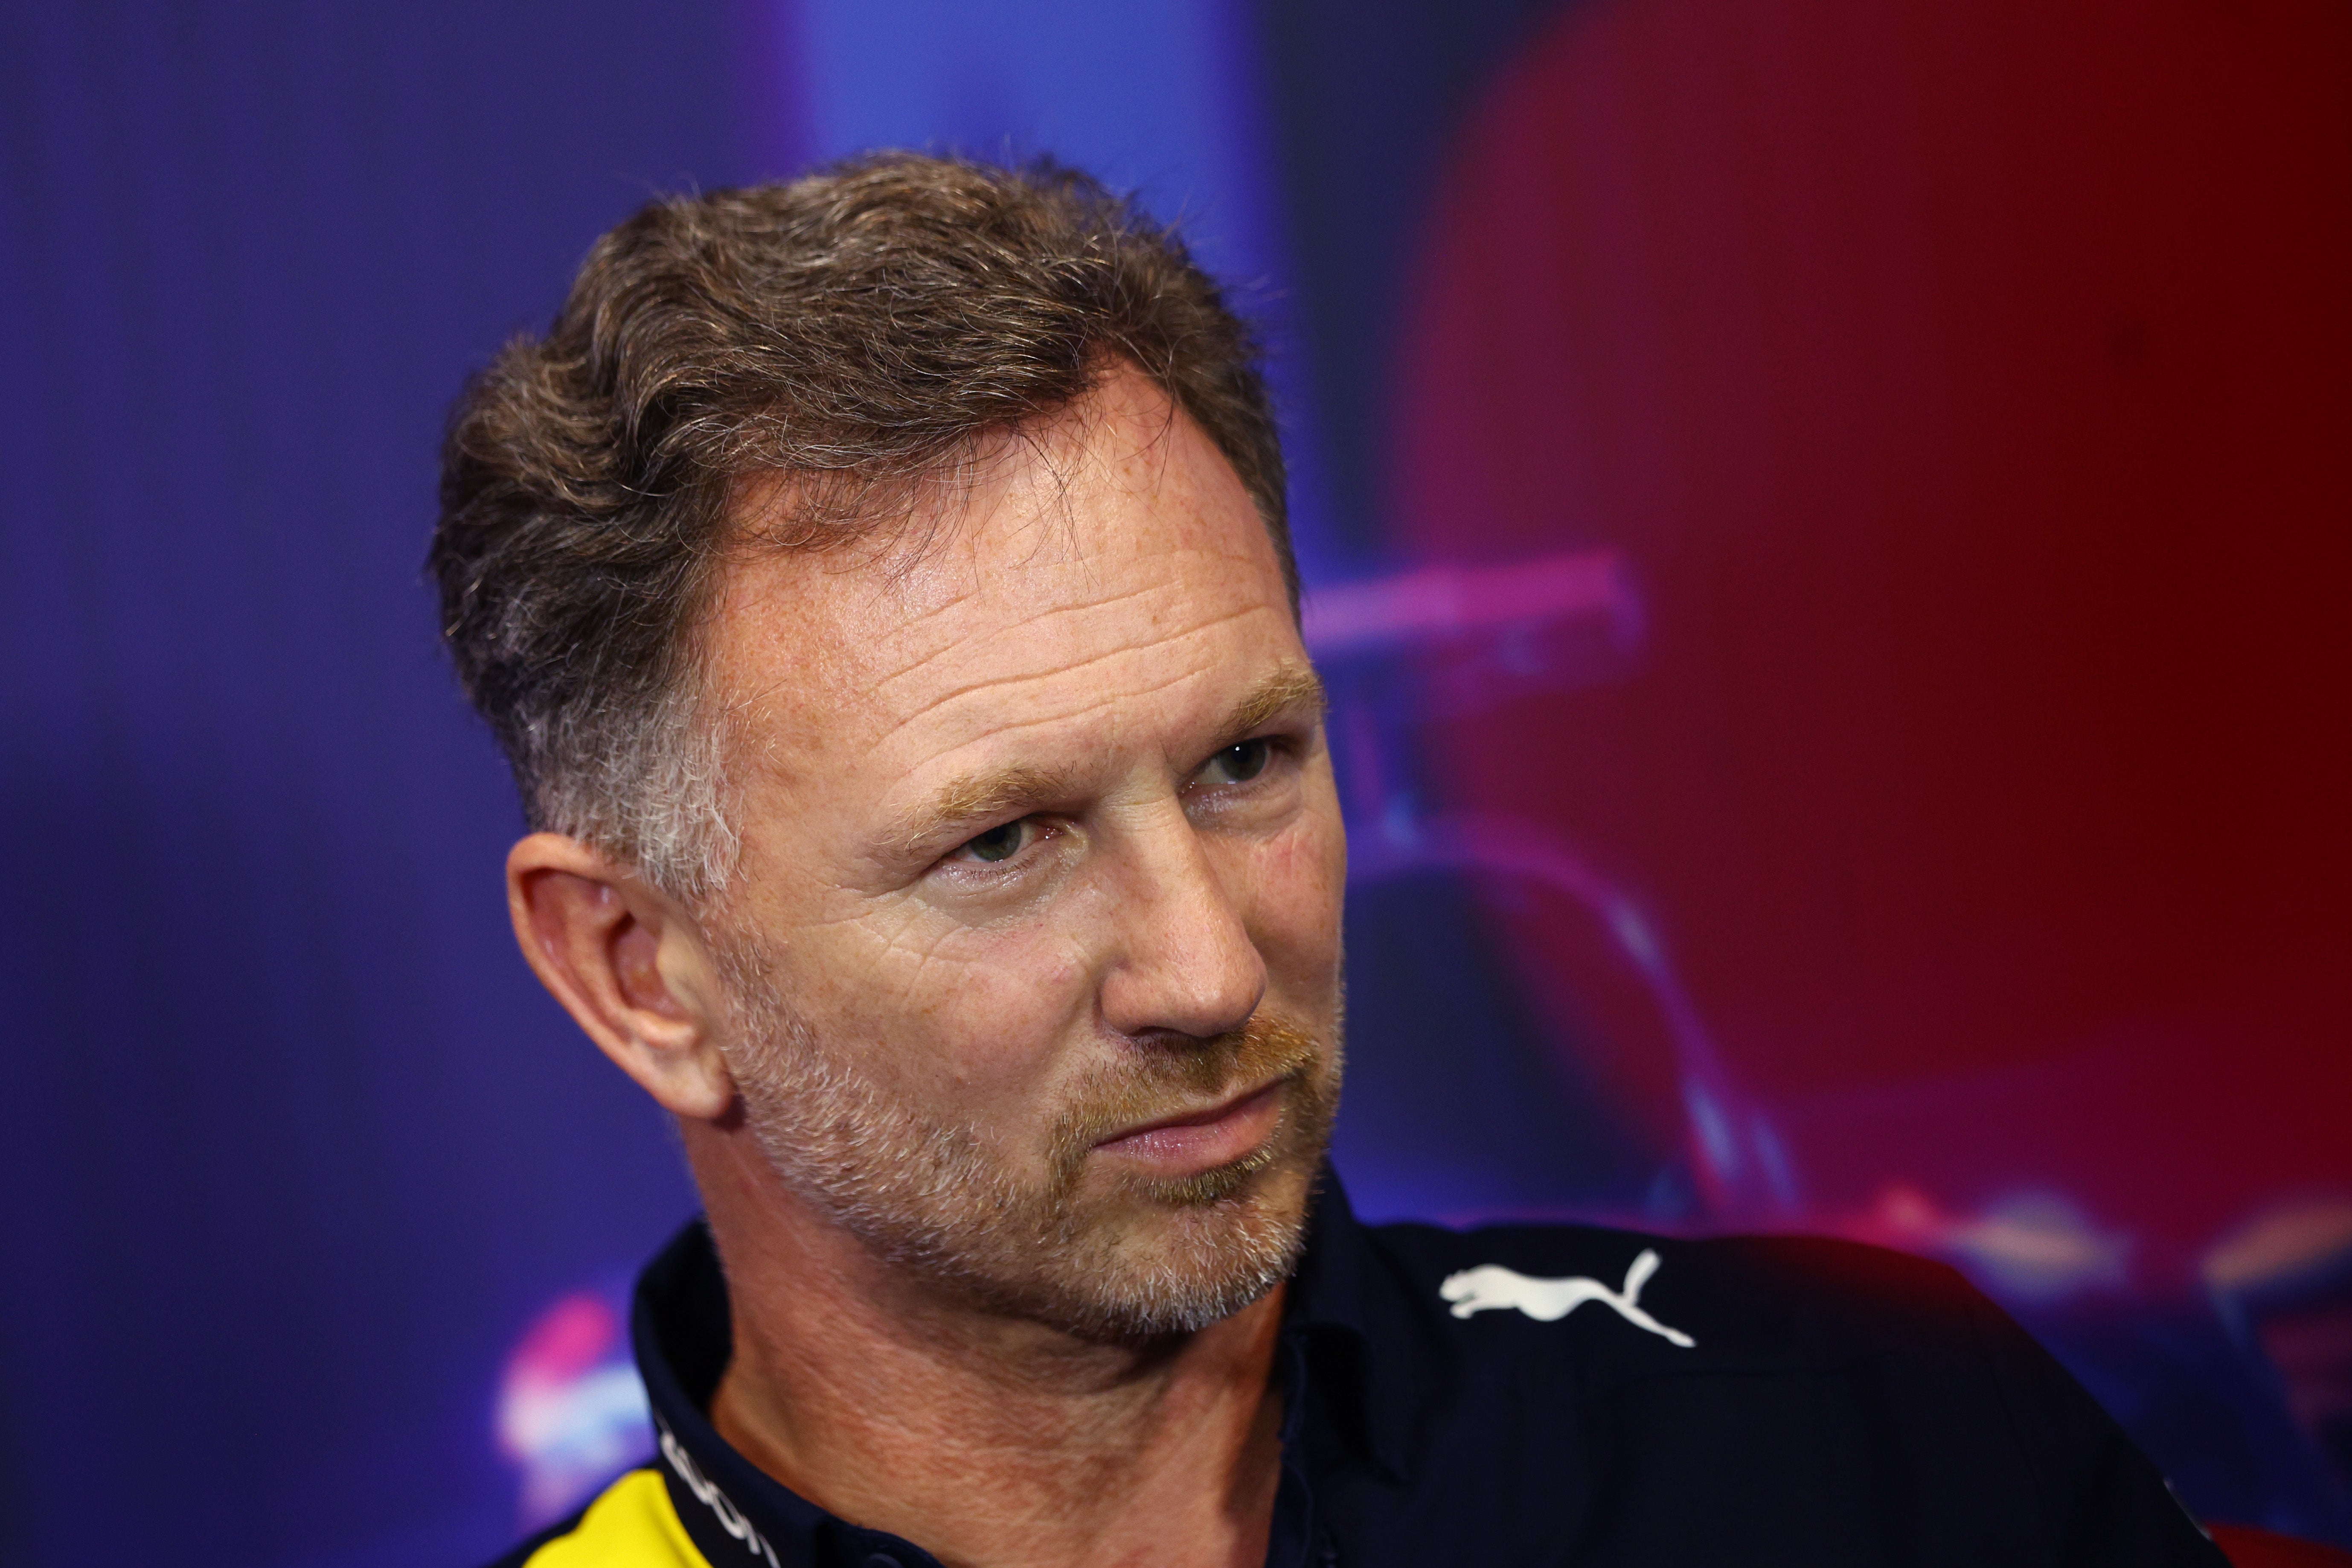 Christian Horner insisted before the results that he was “very confident” that the team had not spent over the cost cap limit